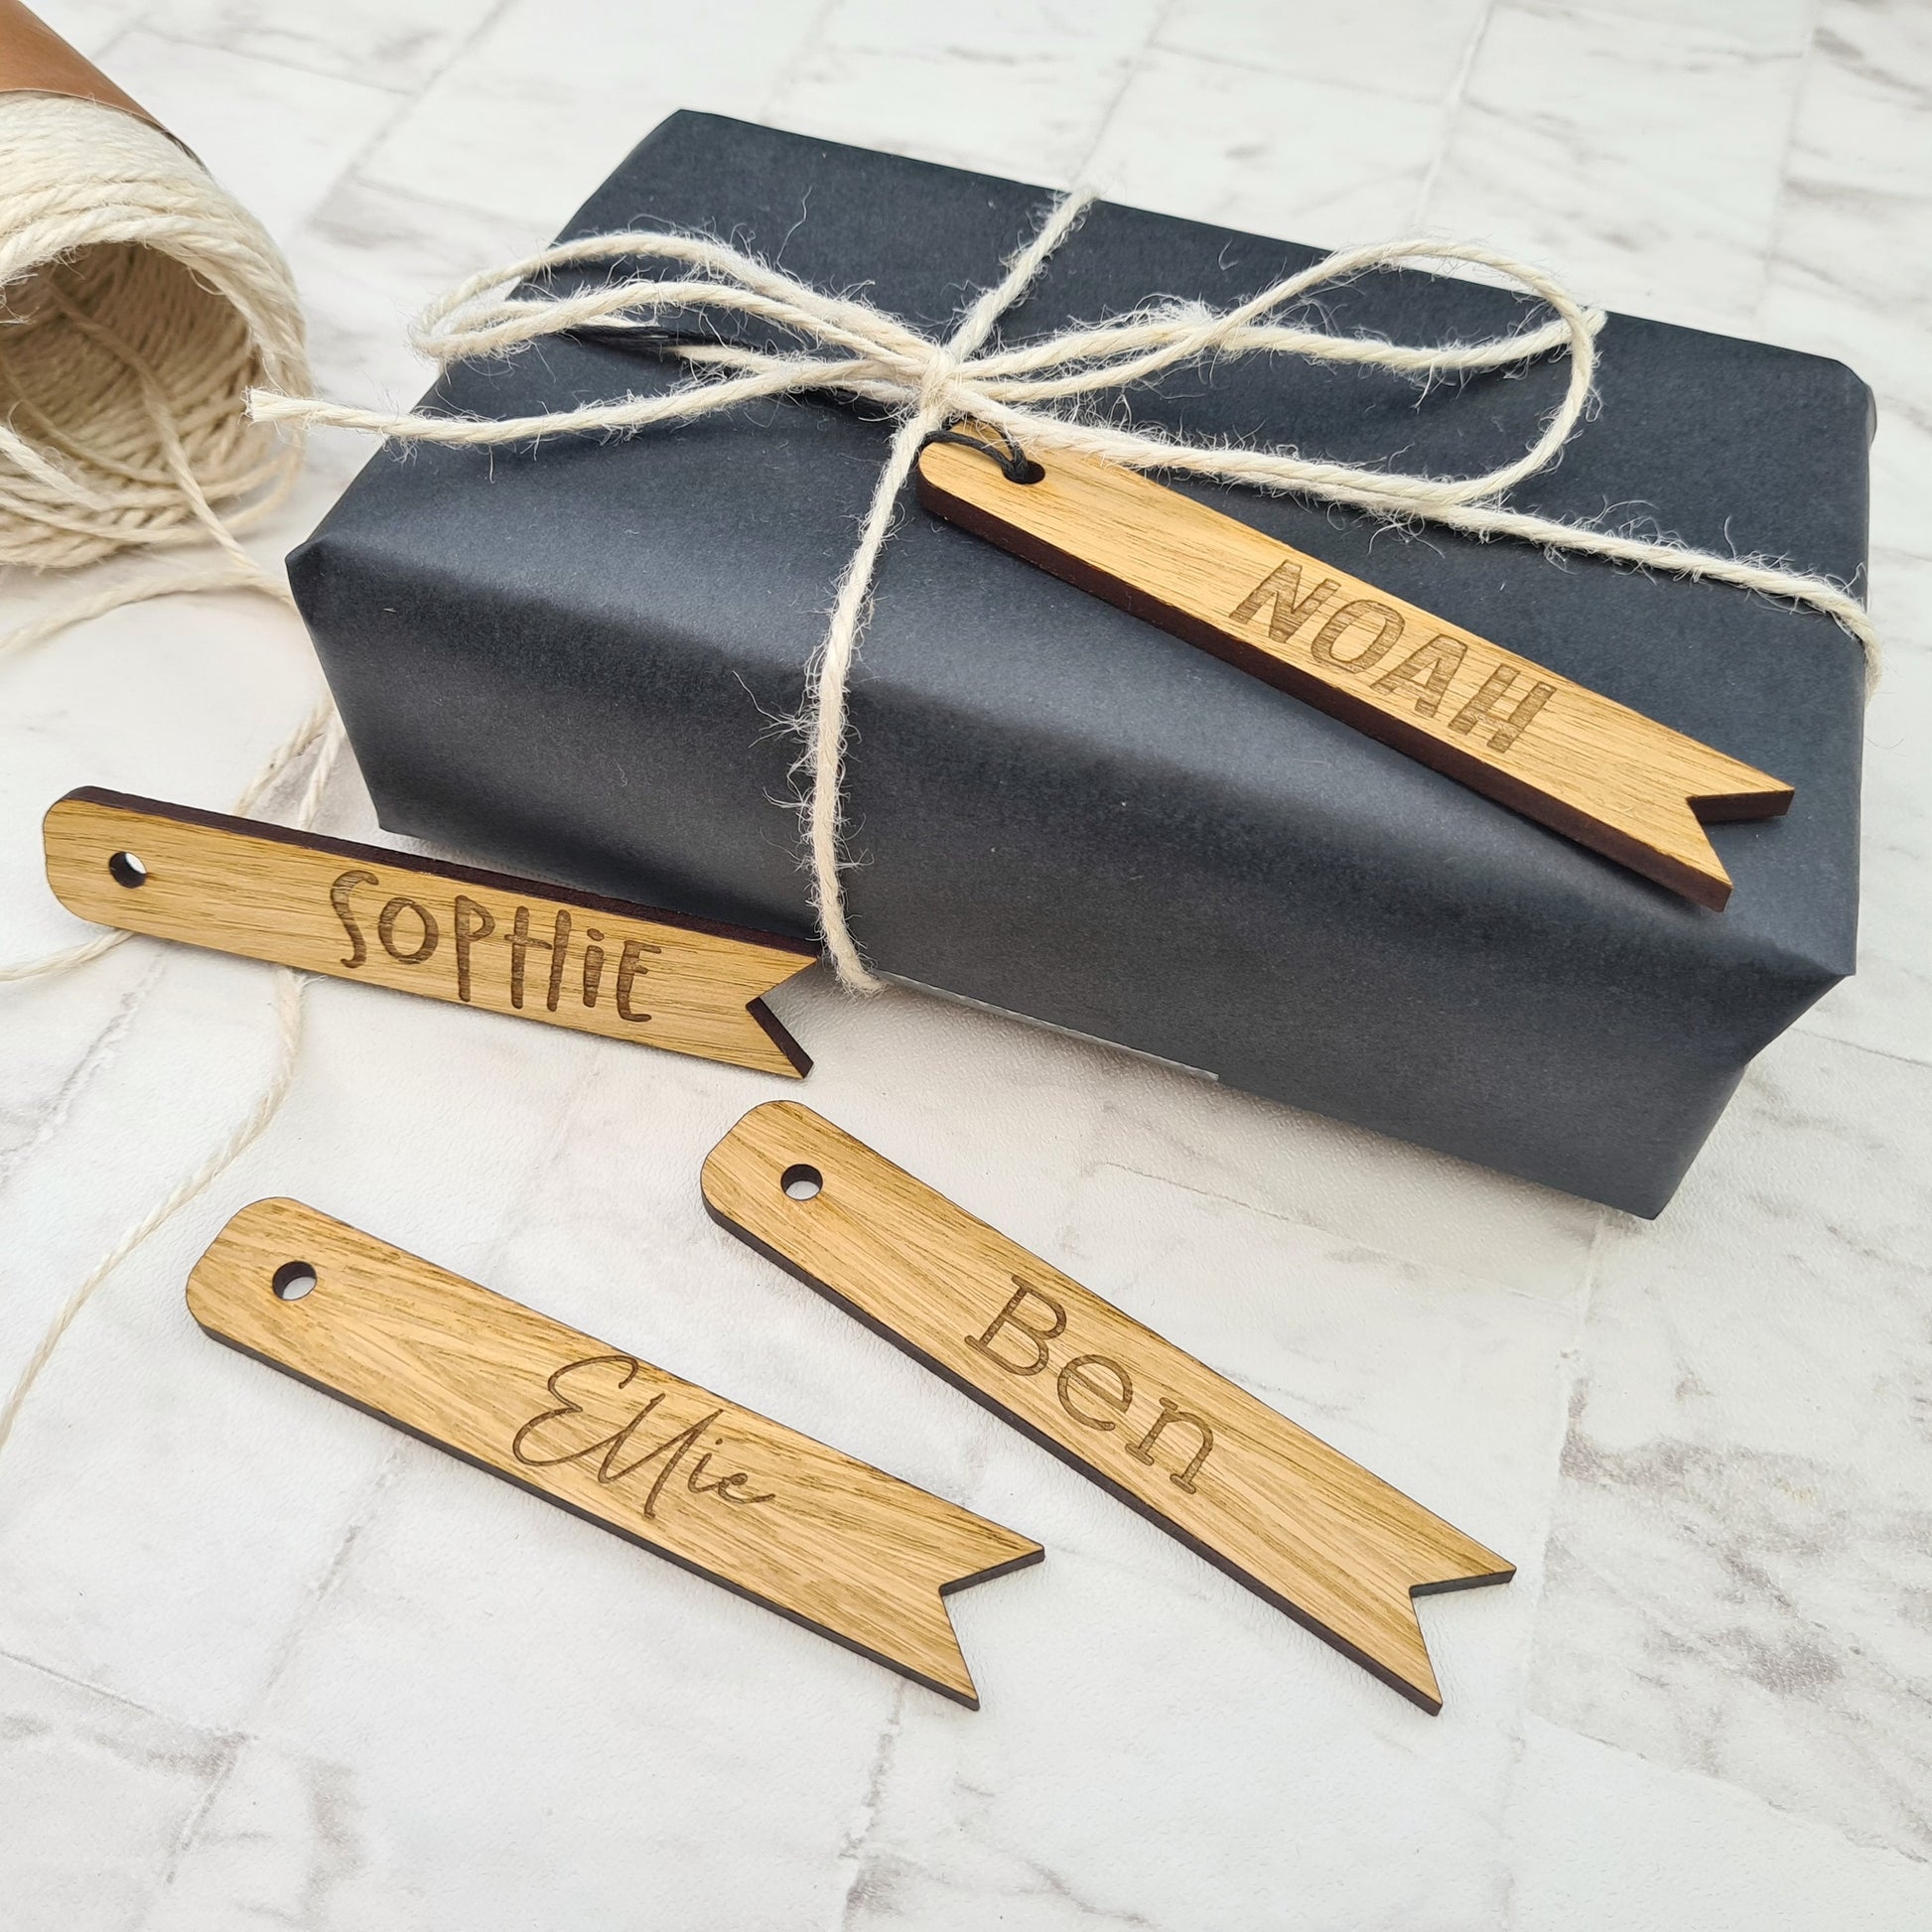 wooden personalised gift tags with names engraved onto them. Shown with a beautifully wrapped gift and some string 